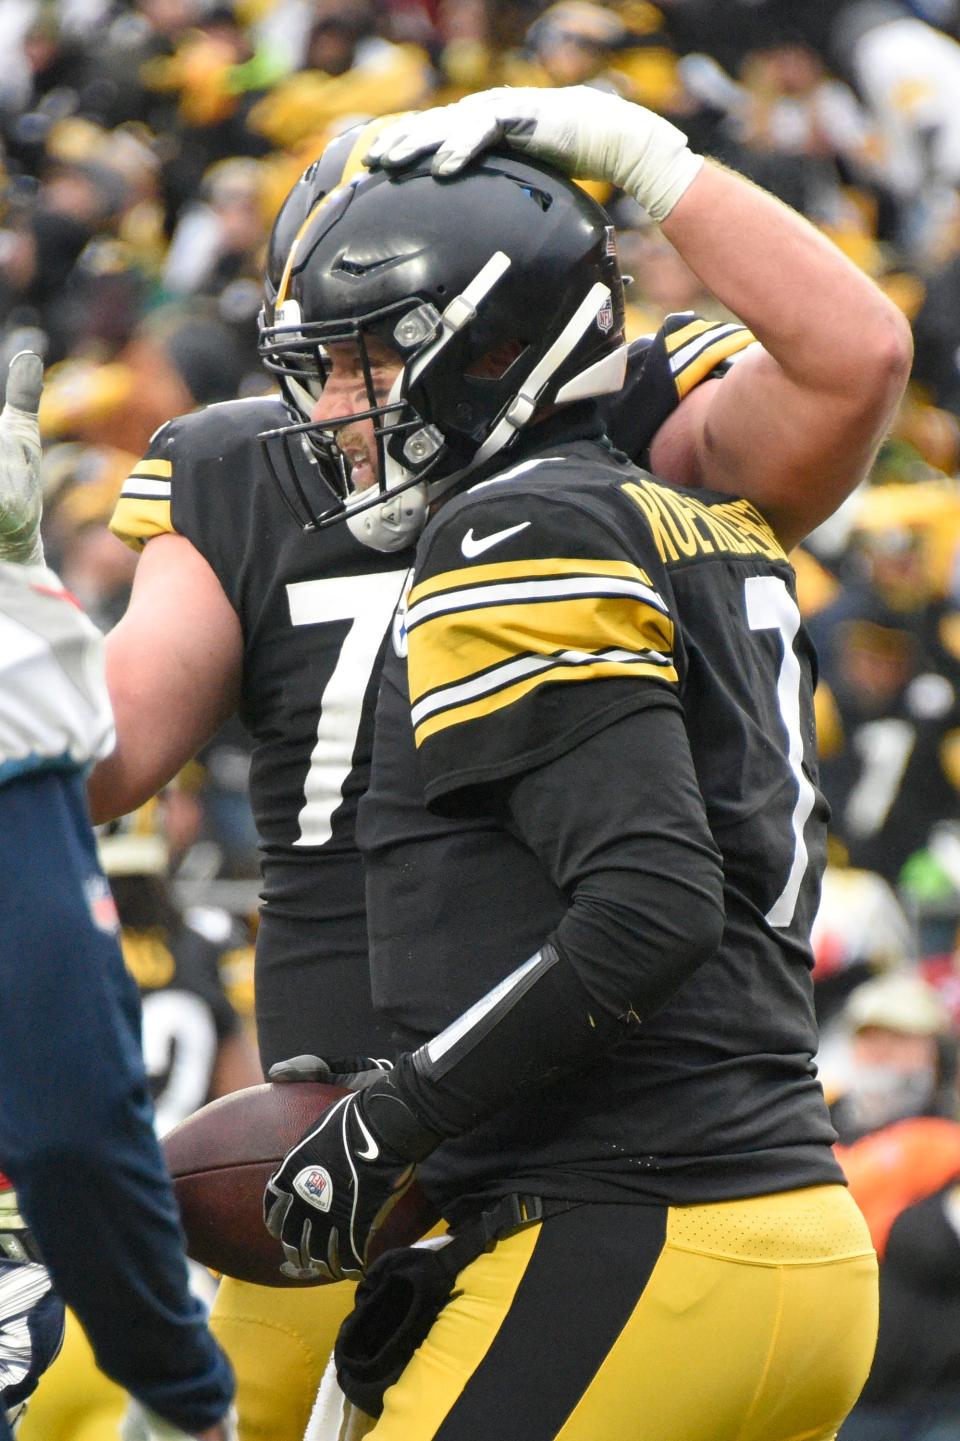 Pittsburgh Steelers quarterback Ben Roethlisberger (7) celebrates with offensive tackle Joe Haeg (71) after scoring a touchdown against the Tennessee Titans during the second half of an NFL football game, Sunday, Dec. 19, 2021, in Pittsburgh. (AP Photo/Don Wright)